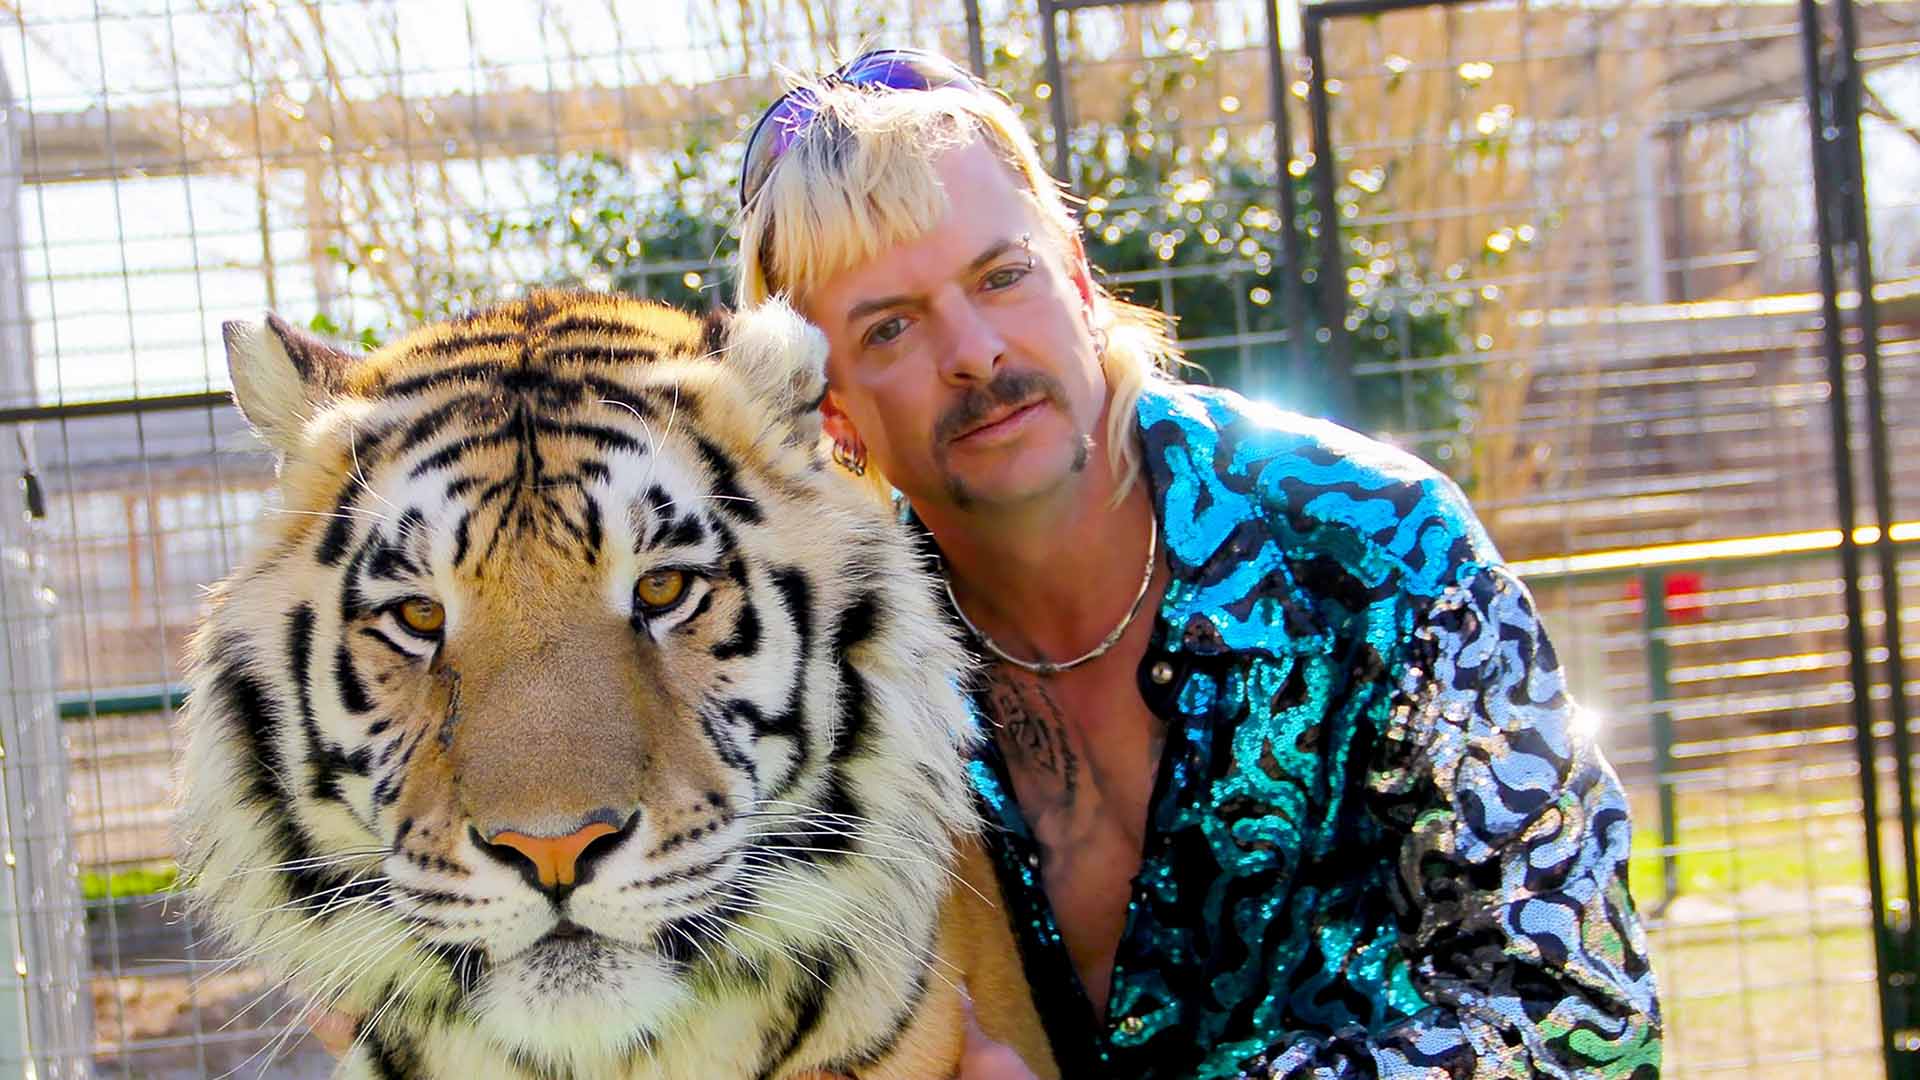 Netflix's Wild New Docuseries 'Tiger King' Is About to Become Your Next True-Crime Binge